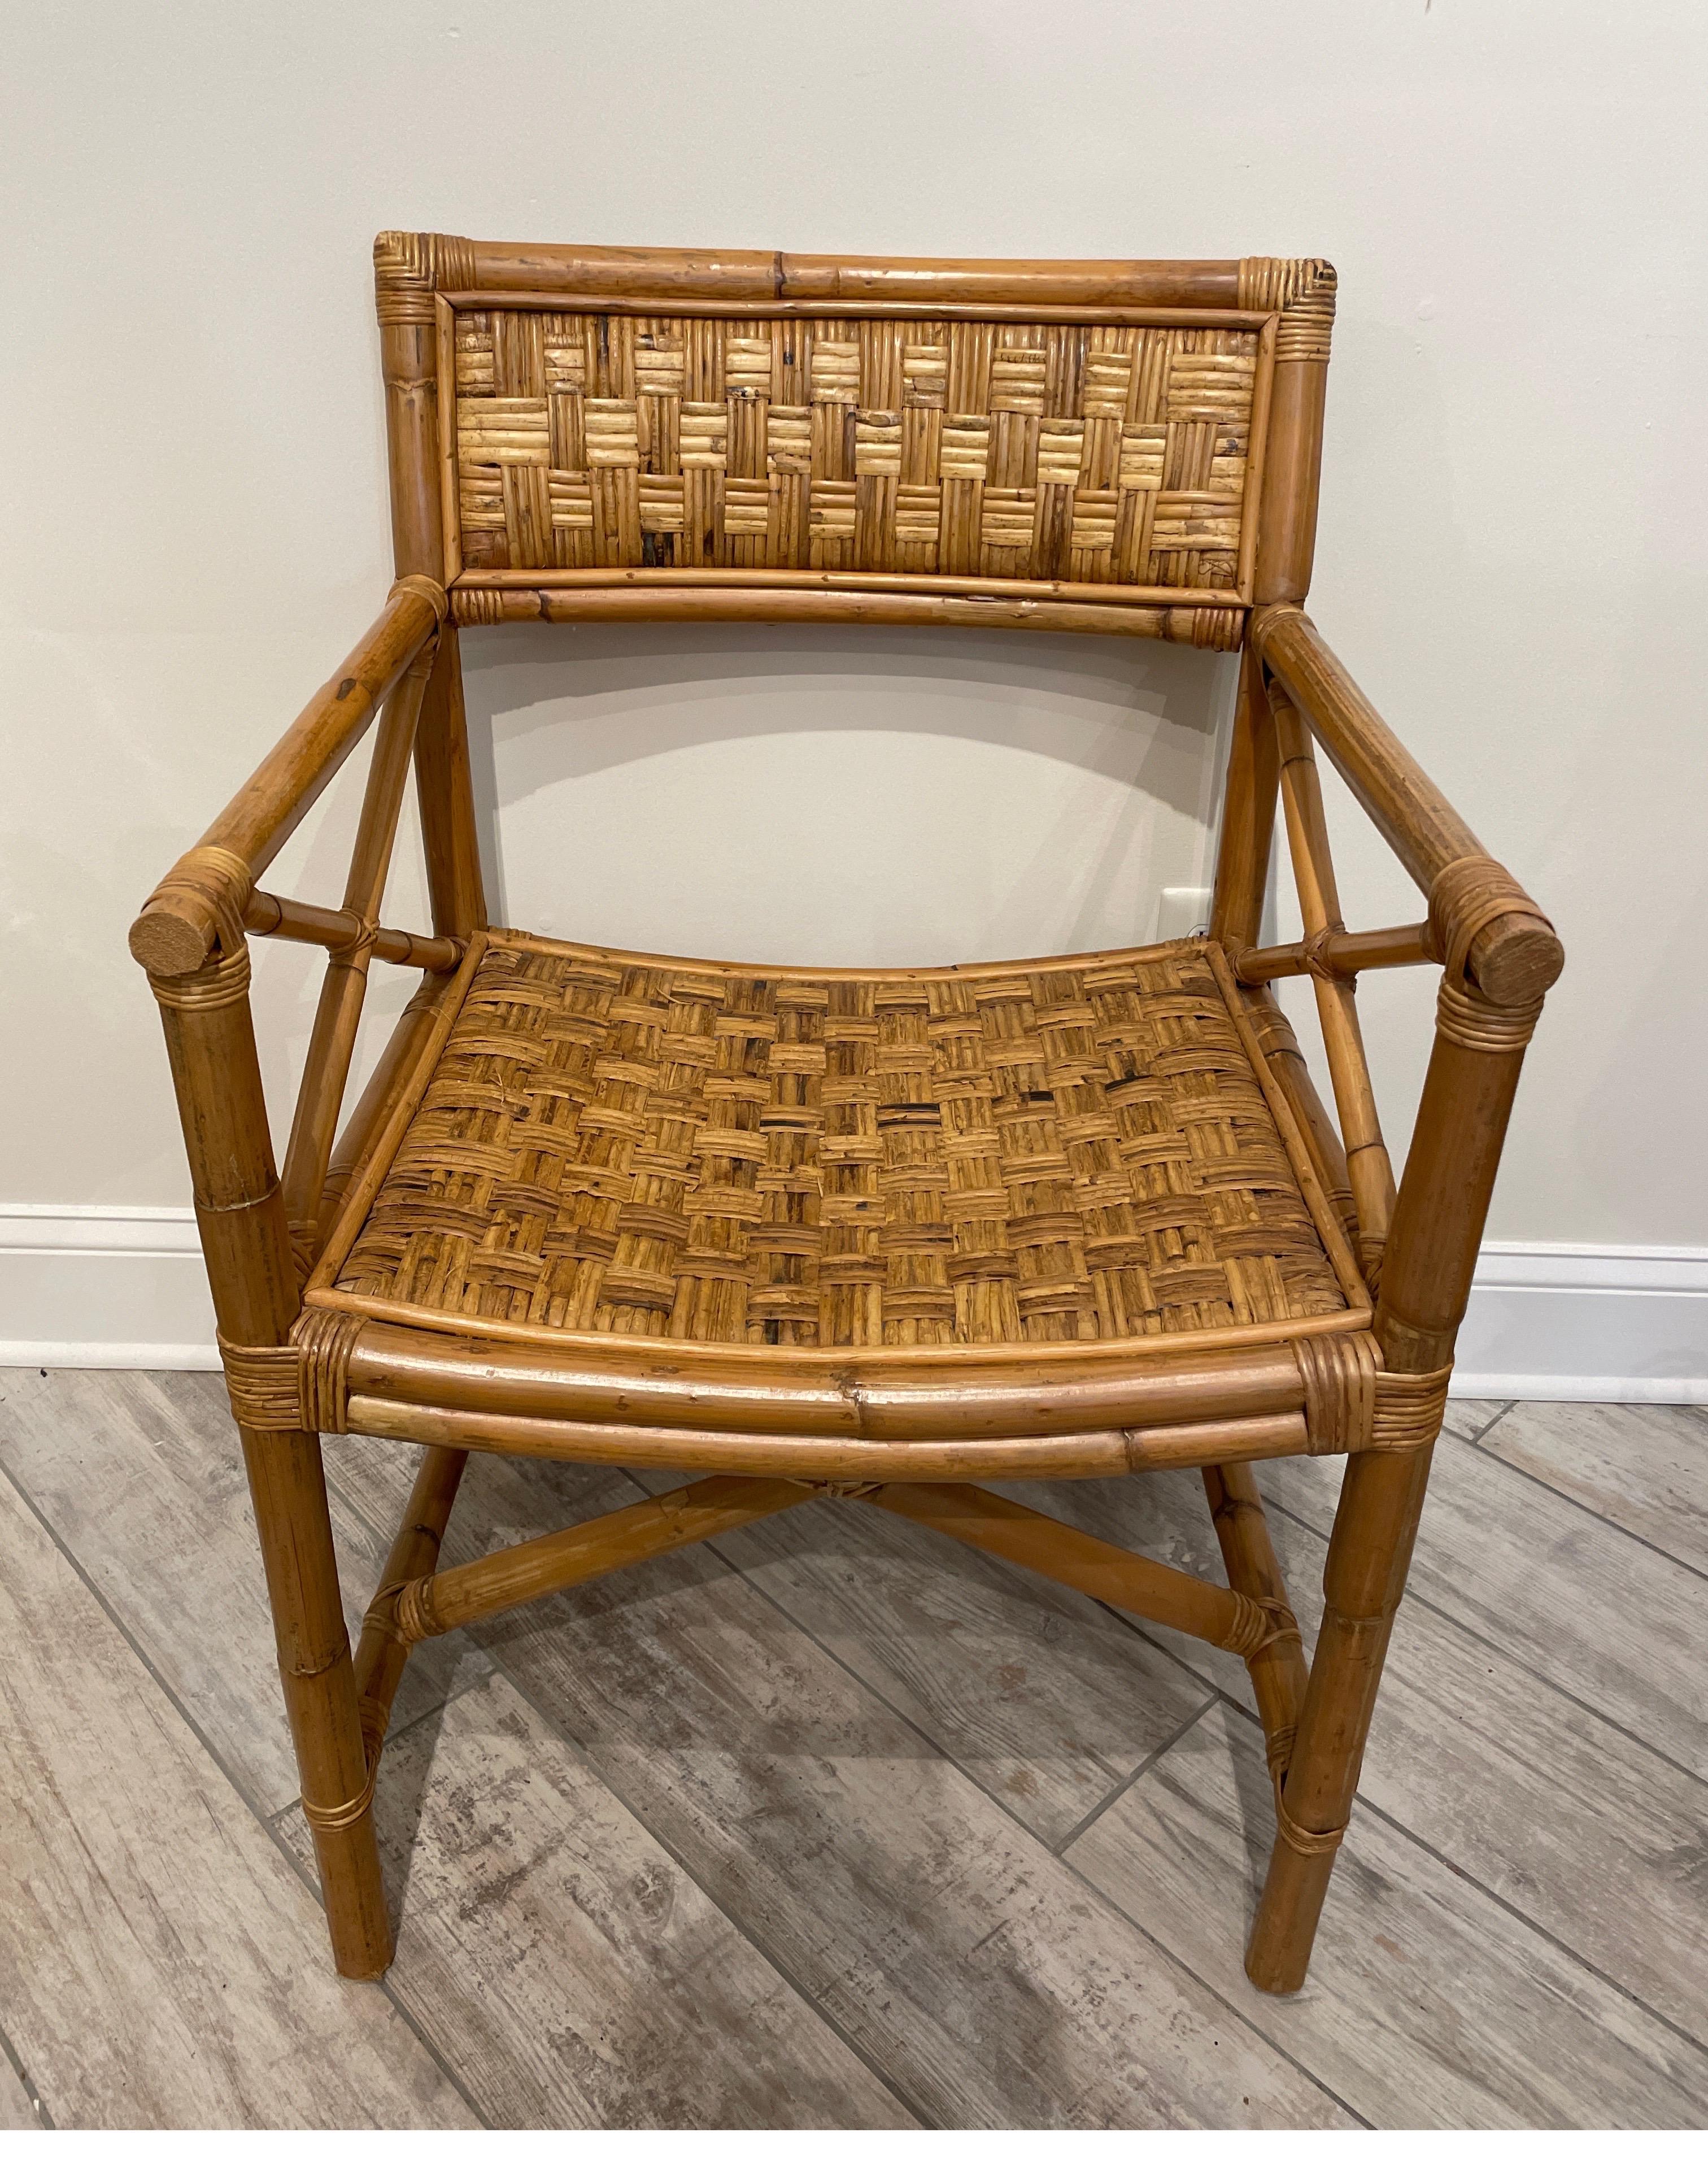 Vintage woven bamboo campaign armchair. Both seat & back are a woven basket weave pattern. Very sturdy frame & construction.